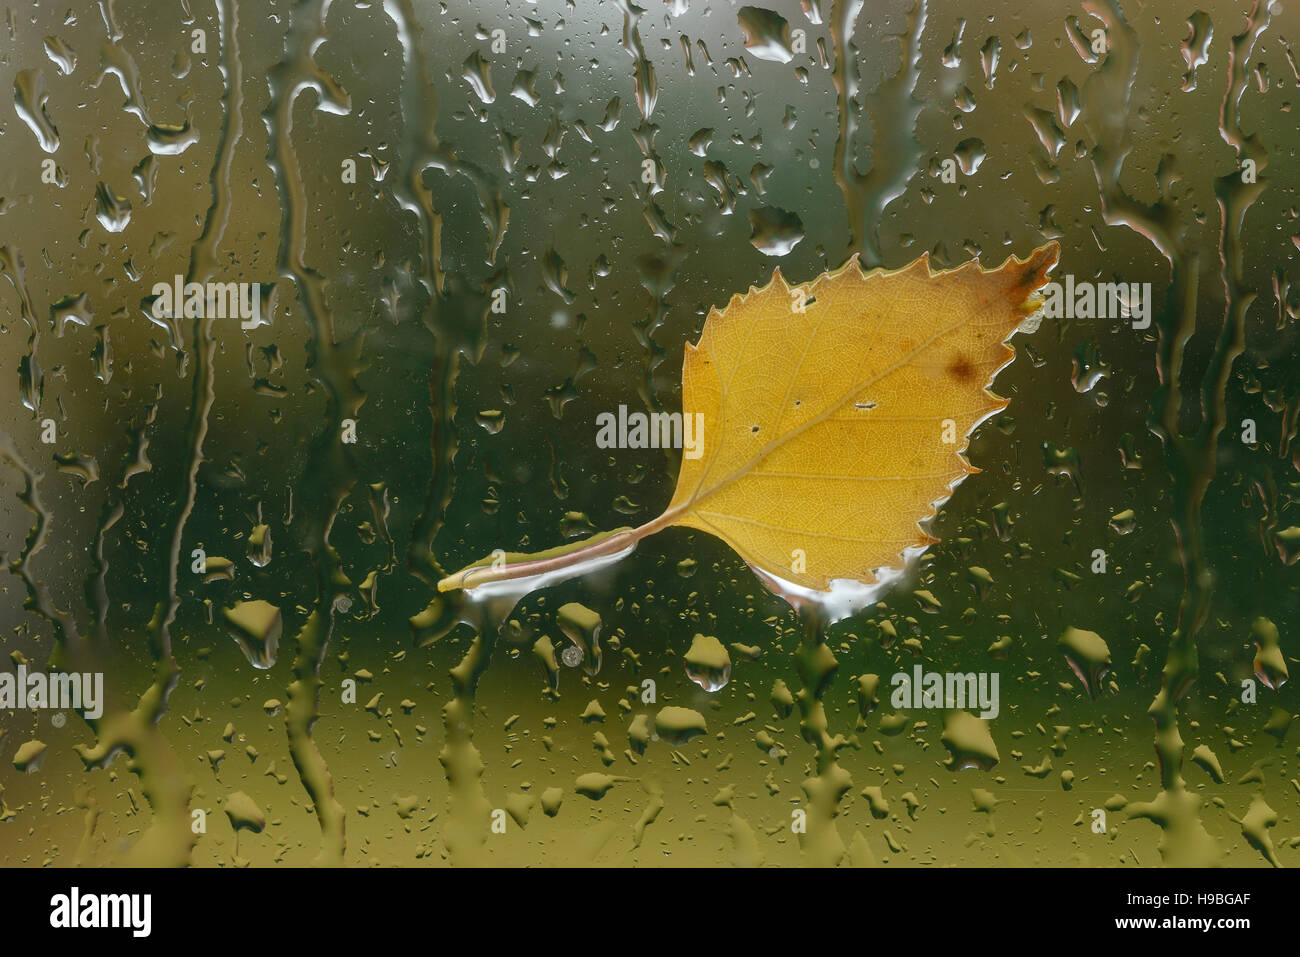 Chester UK. 21st November 2016. UK weather. An autumn leaf stuck to a rain covered window. Andrew Paterson/Alamy Live News Stock Photo